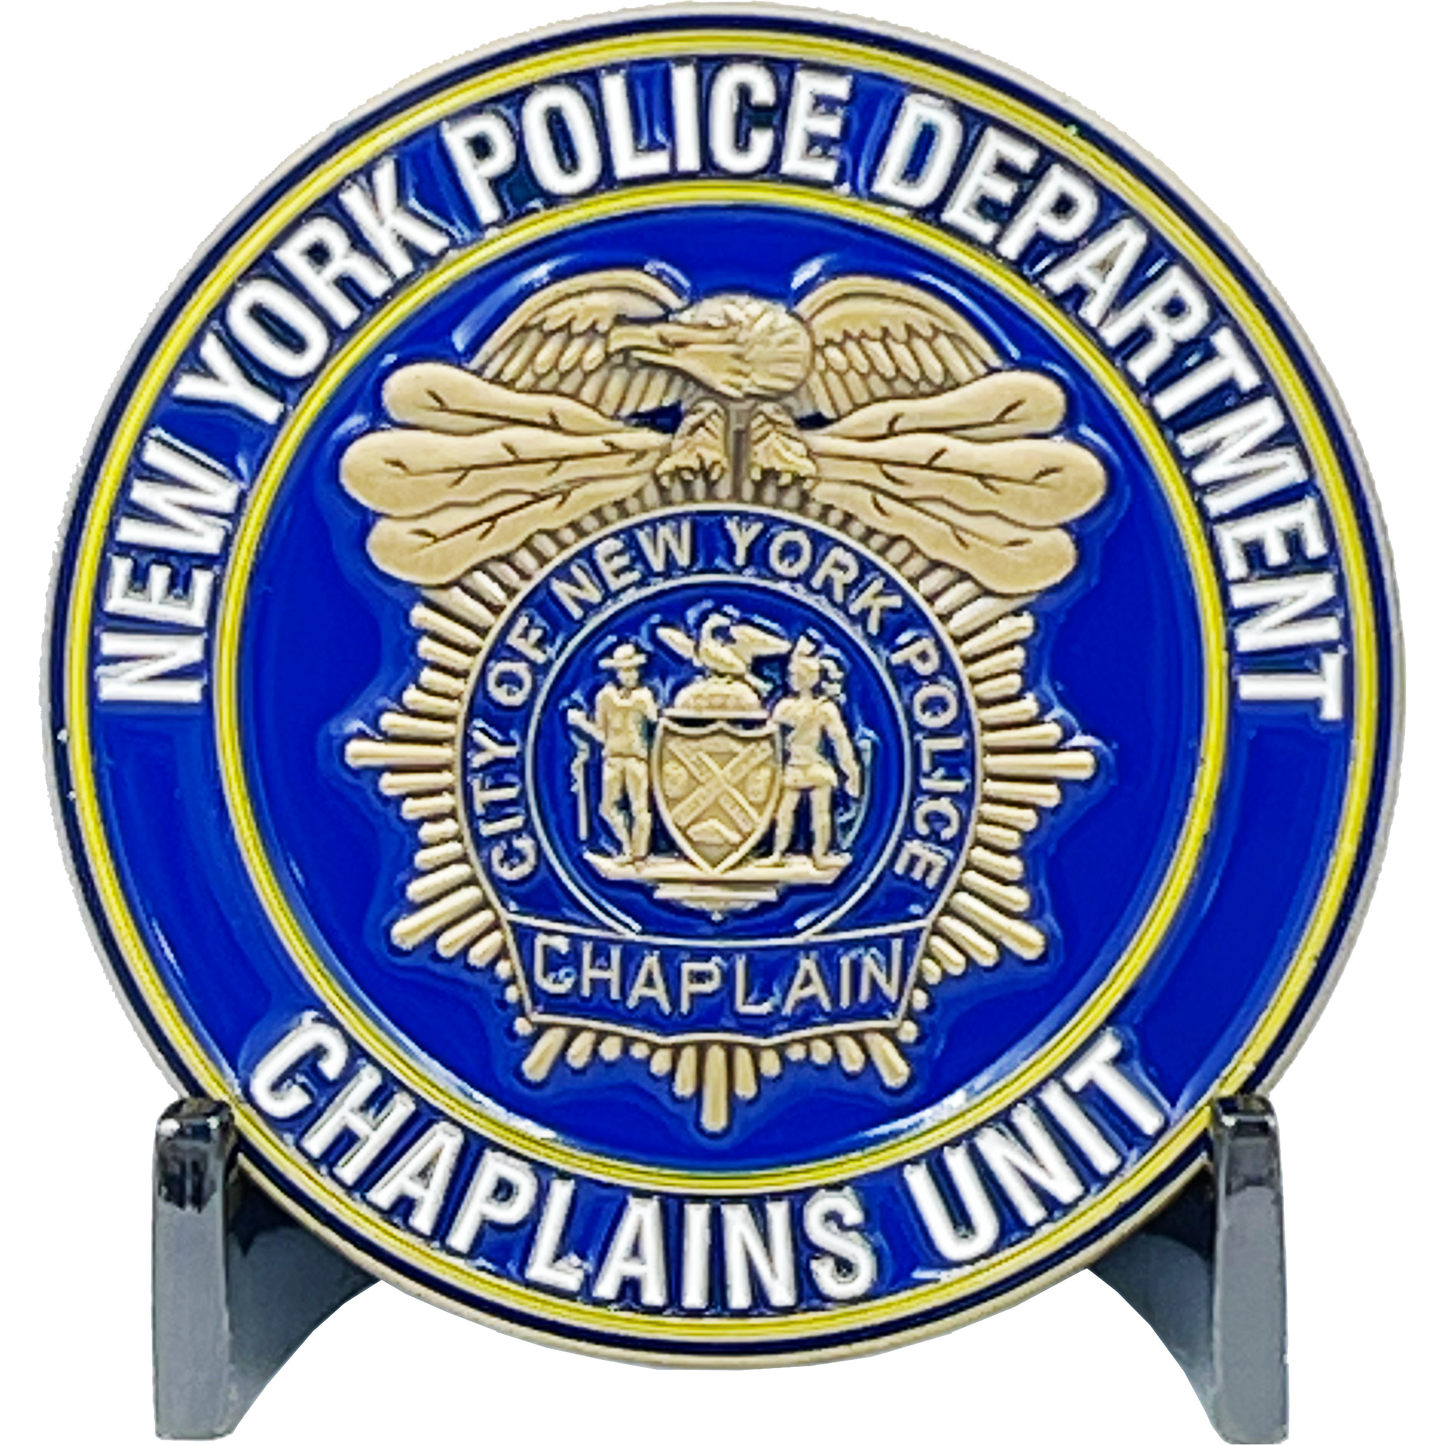 BL8-008 New York Police Department NYPD New York City Police Officer CHAPLAIN Challenge Coin NYC Police flag